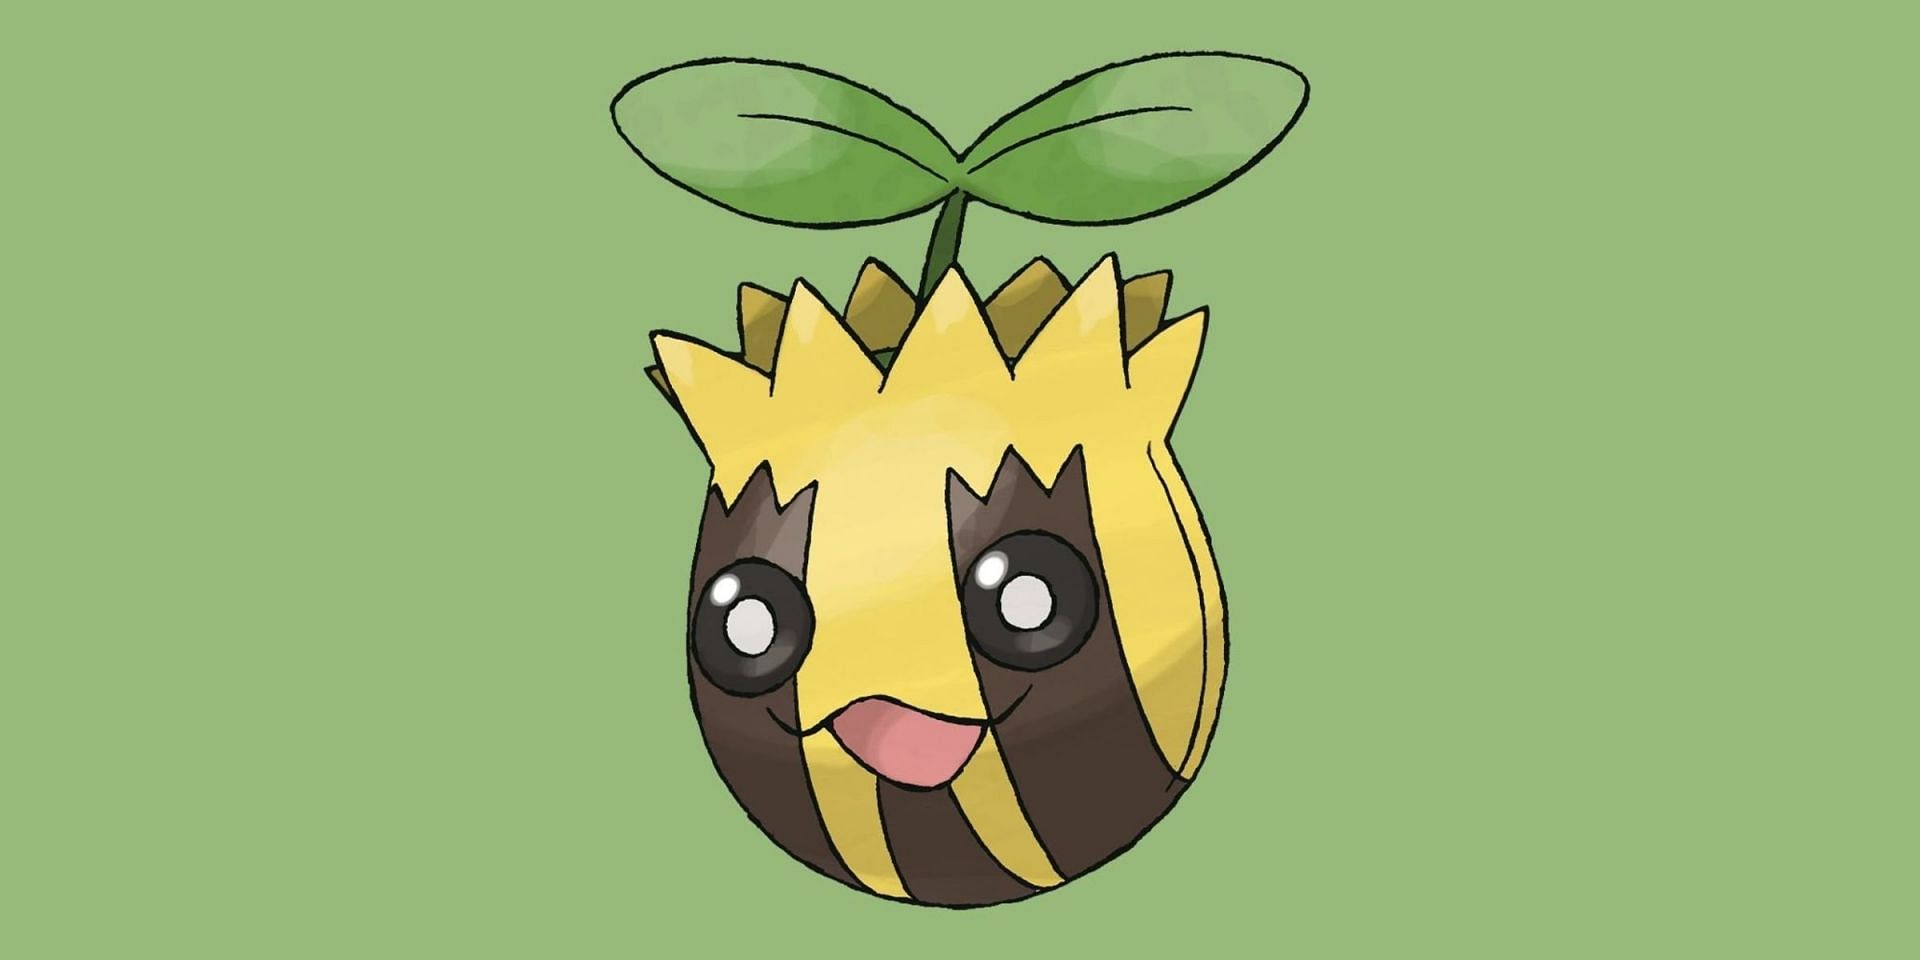 Sunkern was introduced in the second generation of Pokemon games with Pokemon Gold, Silver, and Crystal (Image via Nintendo/The Pokemon Company)